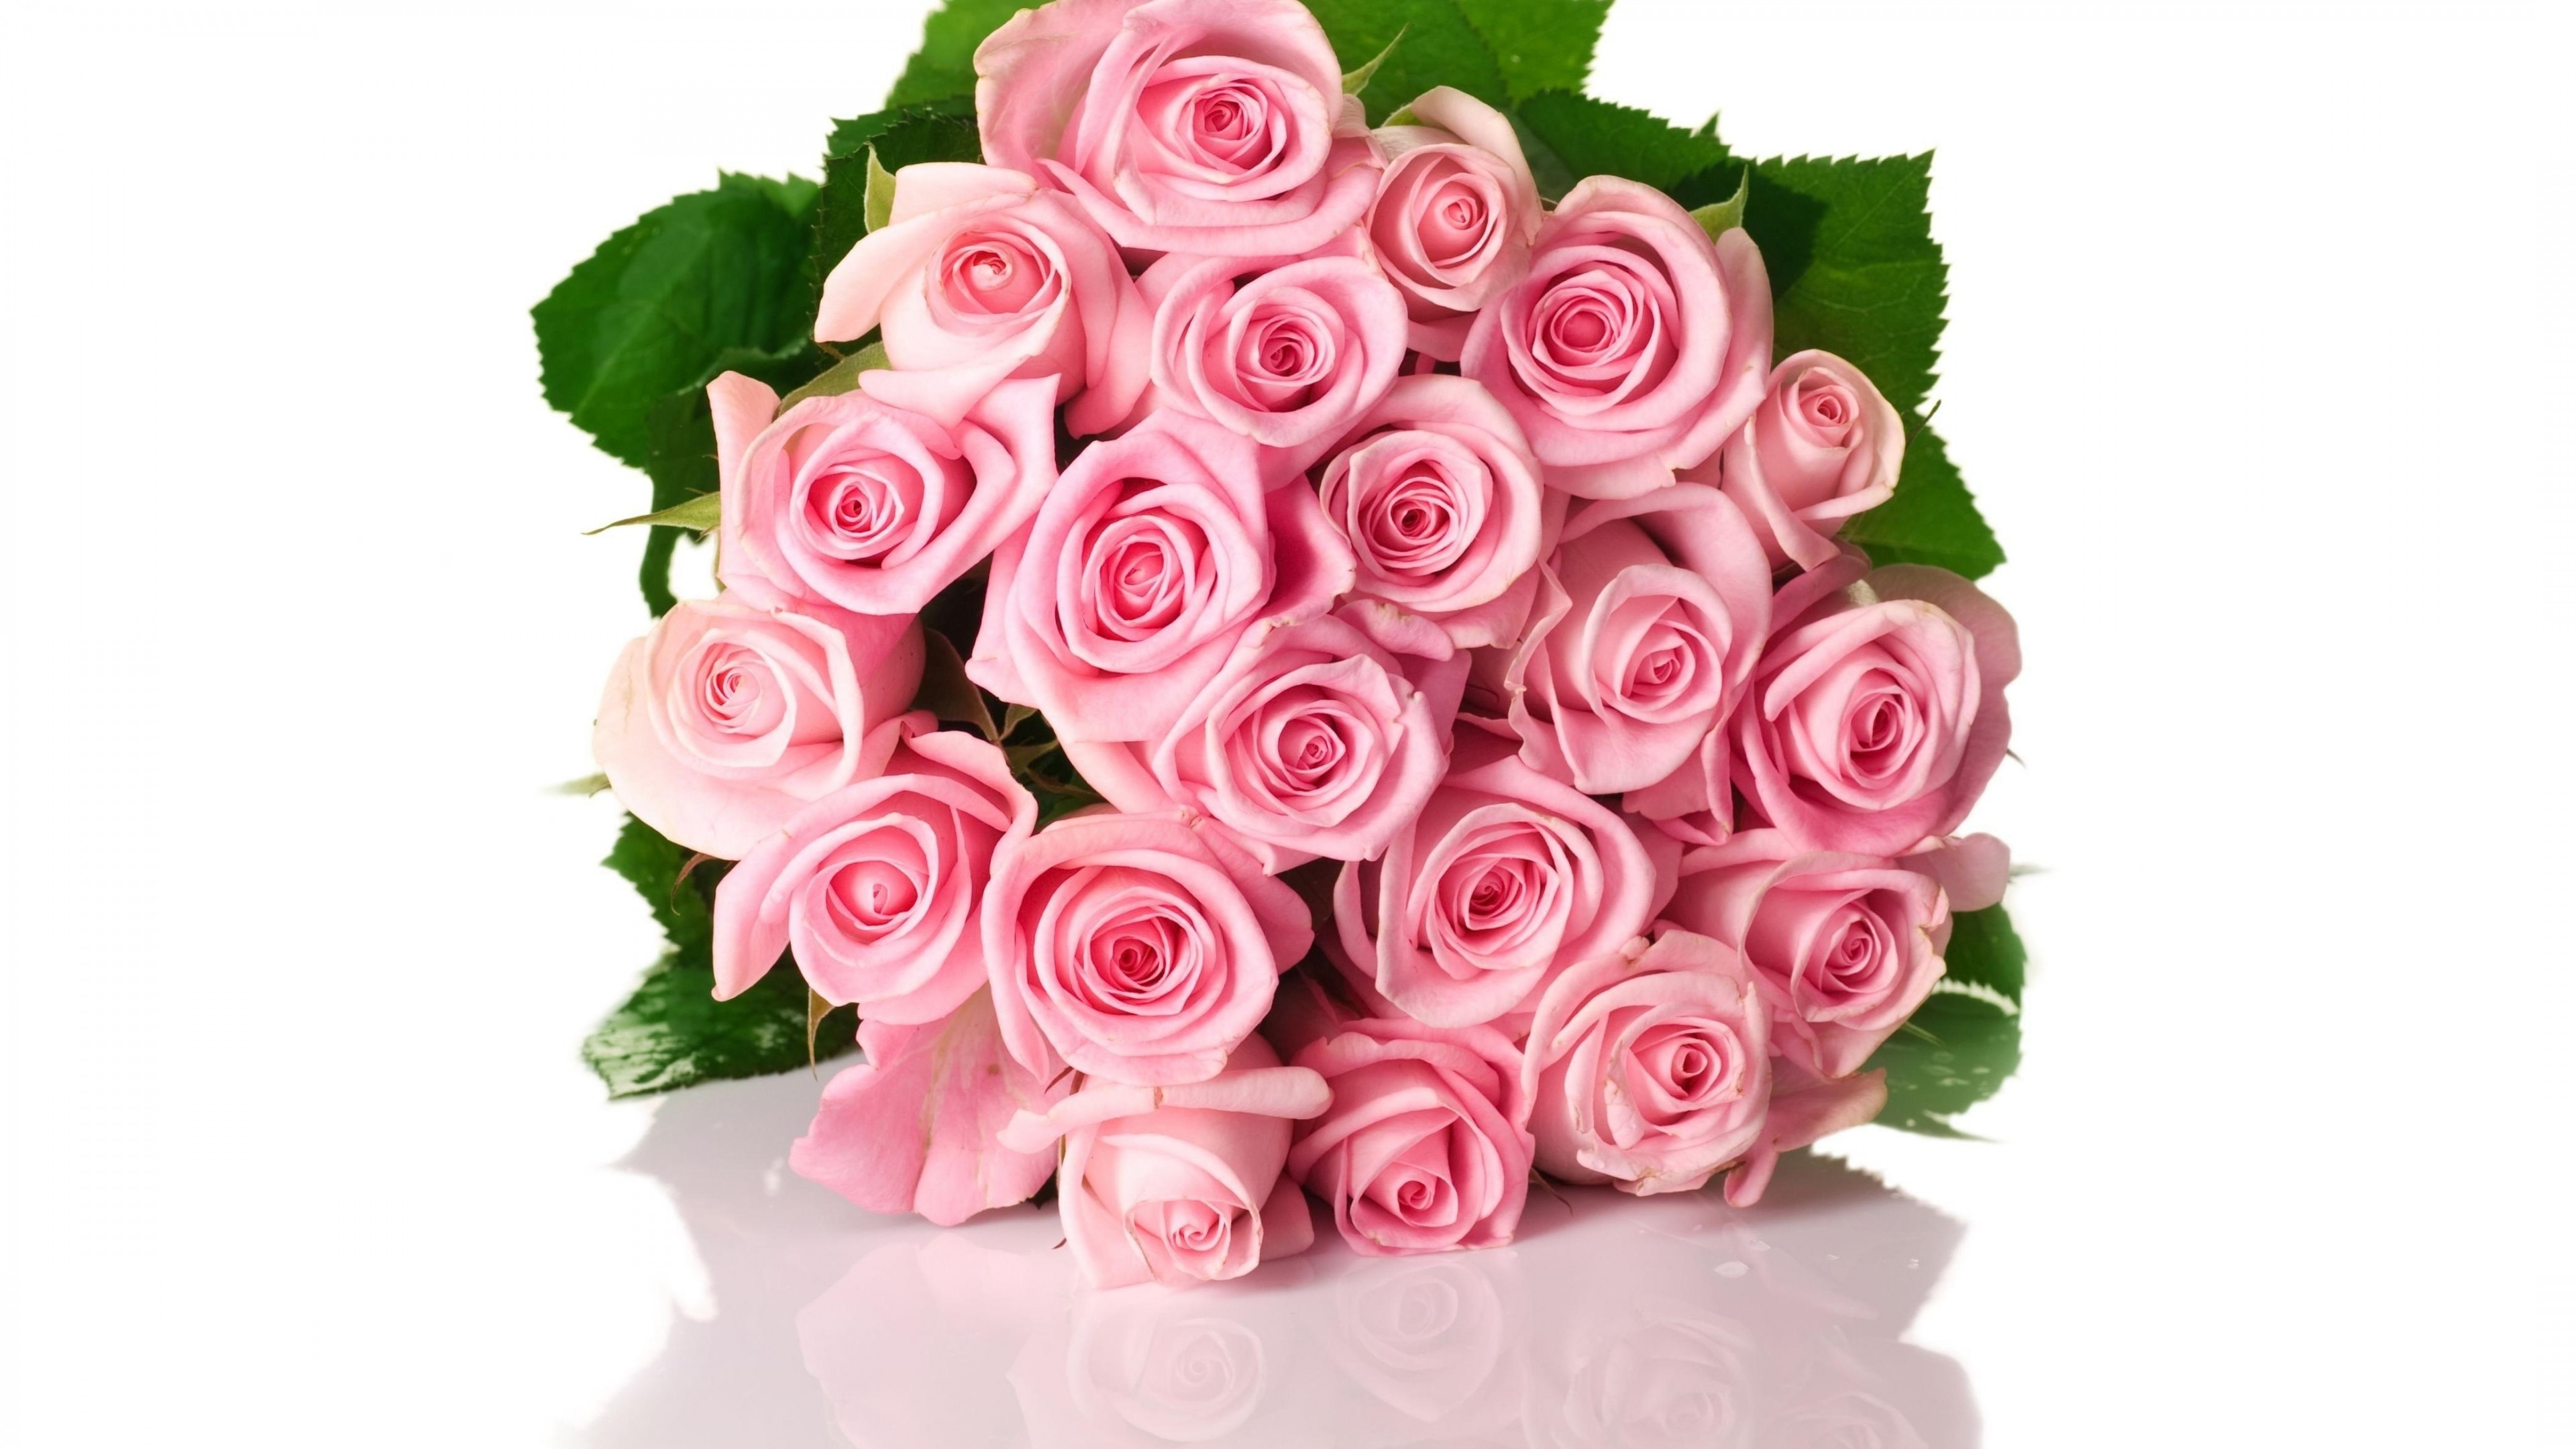 3840x2160  Wallpaper roses, flowers, pink, flower, green, white background,  shadow